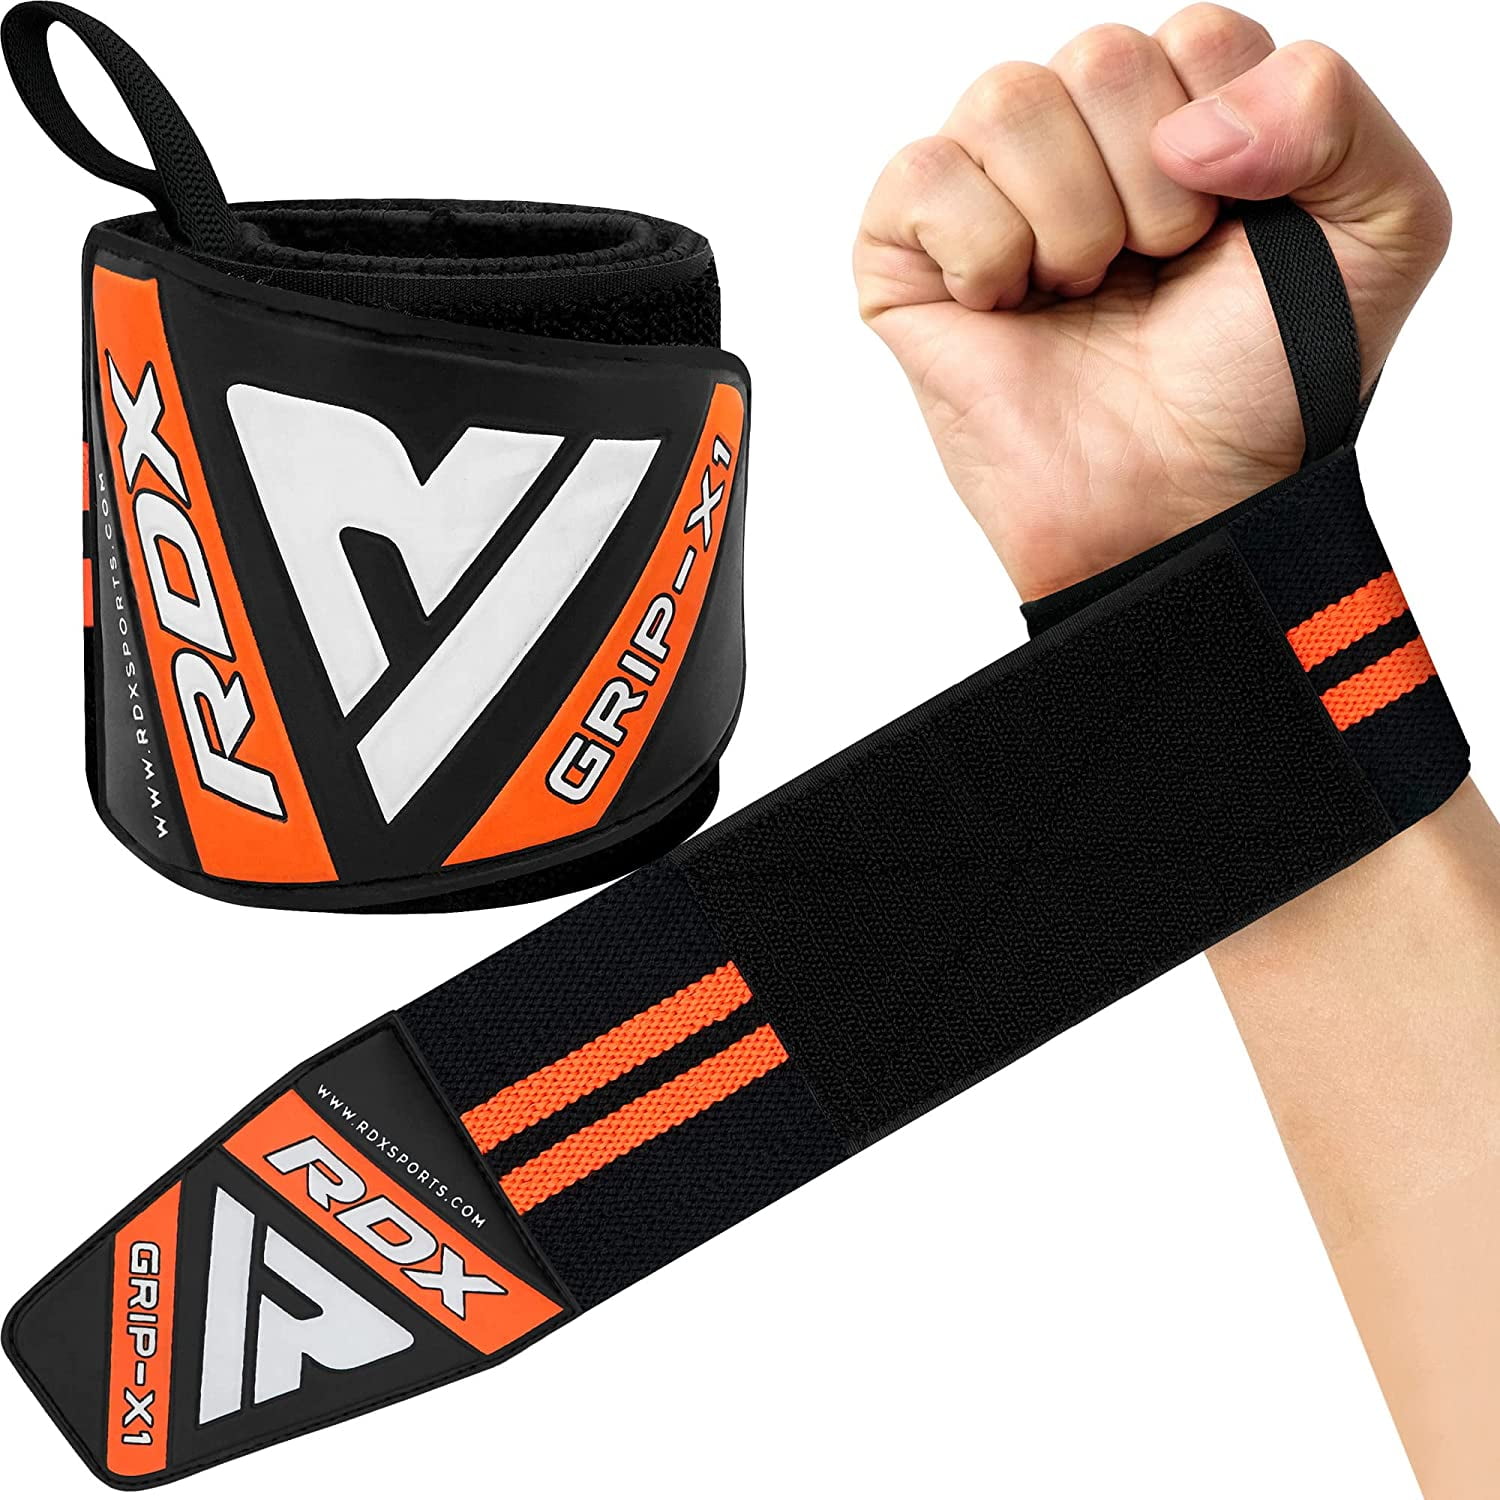 SINGLE LOOP 21 INCH LIFTING STRAPS BODYBUILDING WRIST BAR SUPPORT GYM EXERCISE 